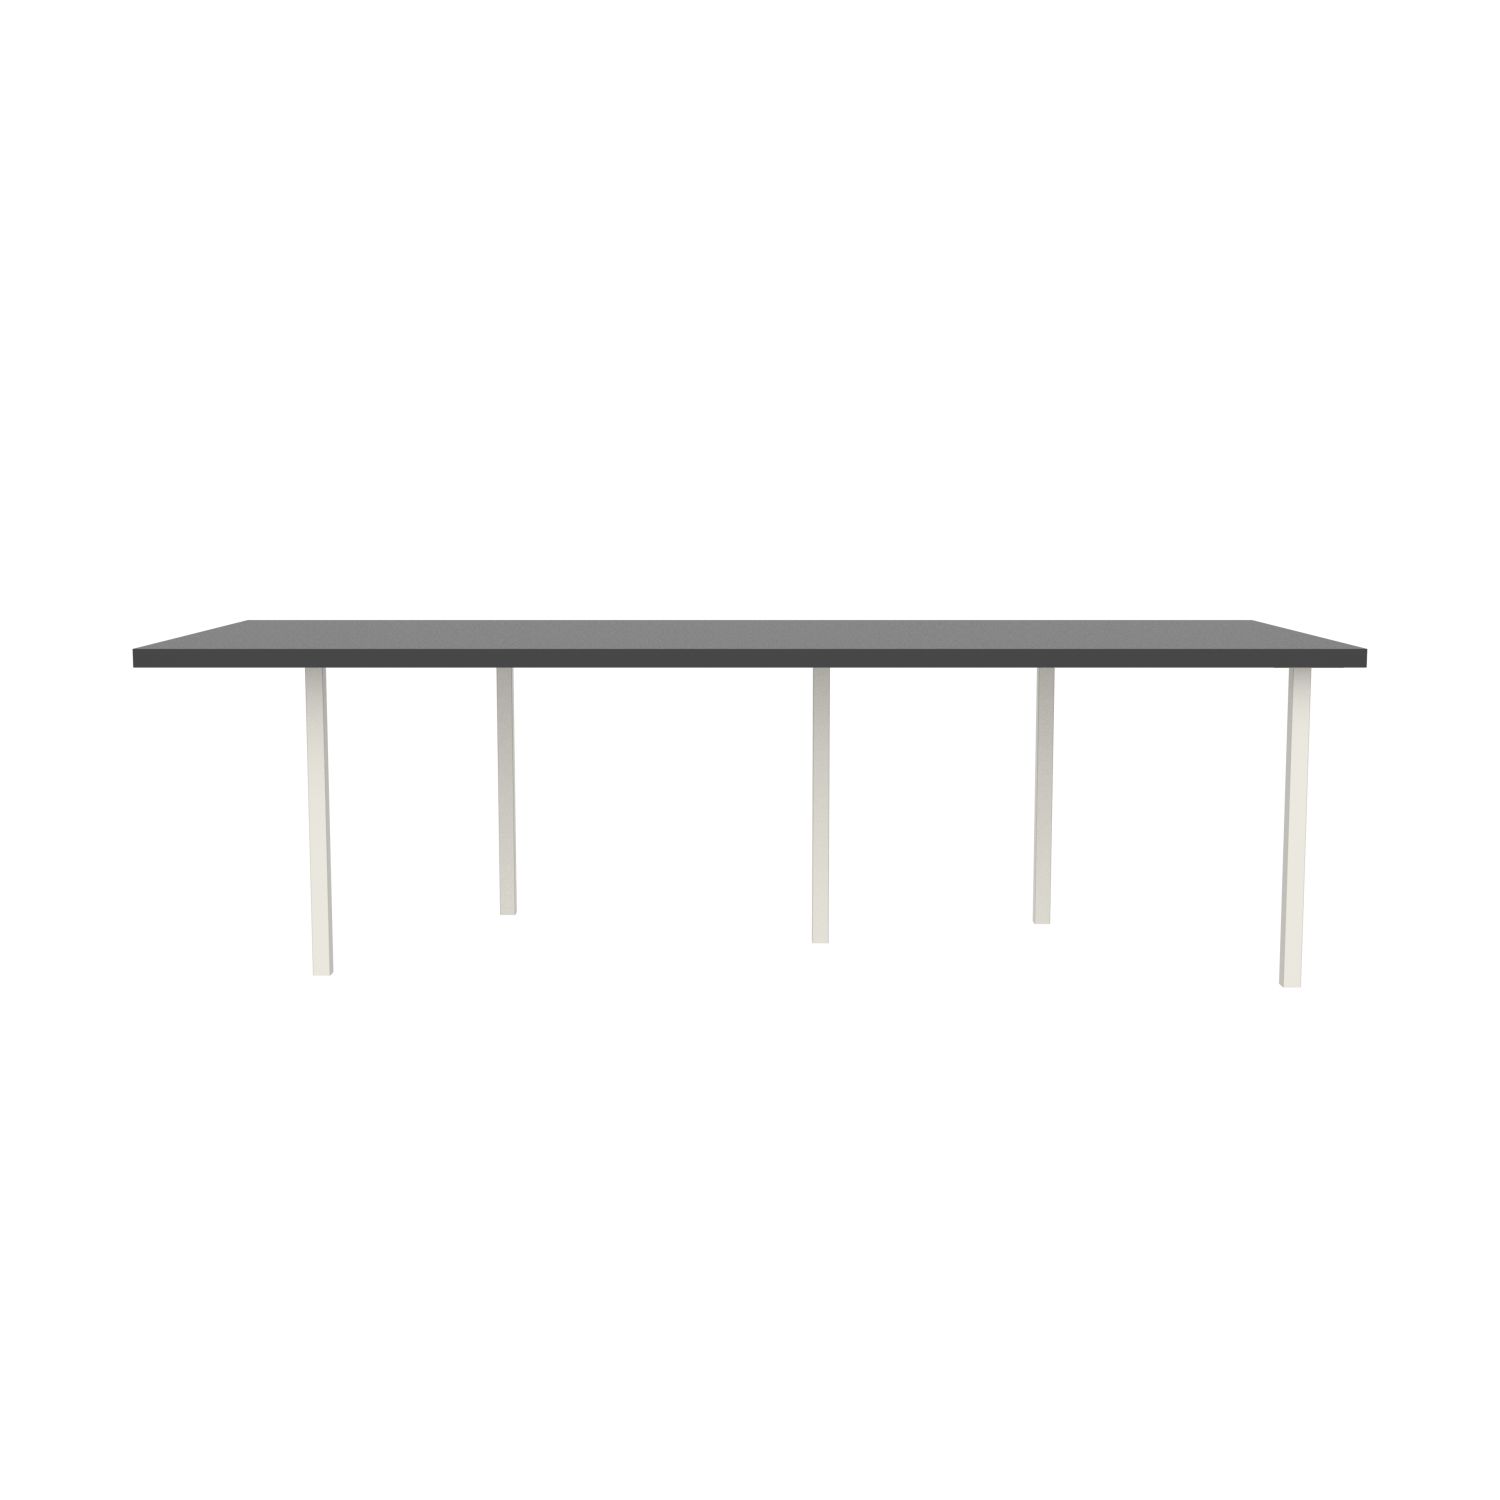 lensvelt bbrand table five fixed heigt 103x264 hpl black 50 mm price level 1 white ral9010